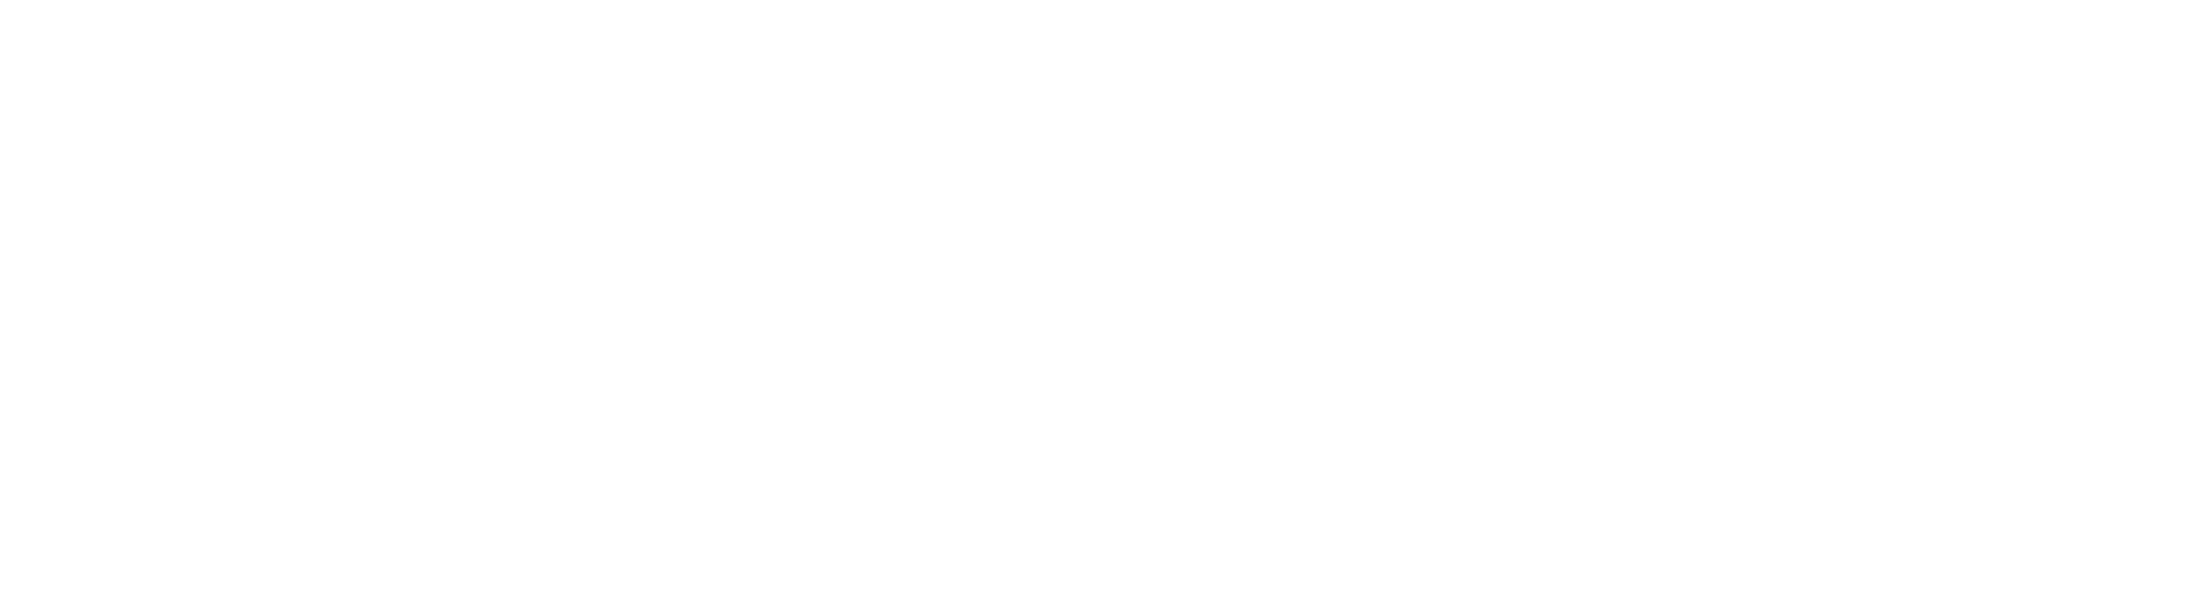 Kaiser Permanente Logo Black And White - White Bullet Points Png (2400x2400), Png Download